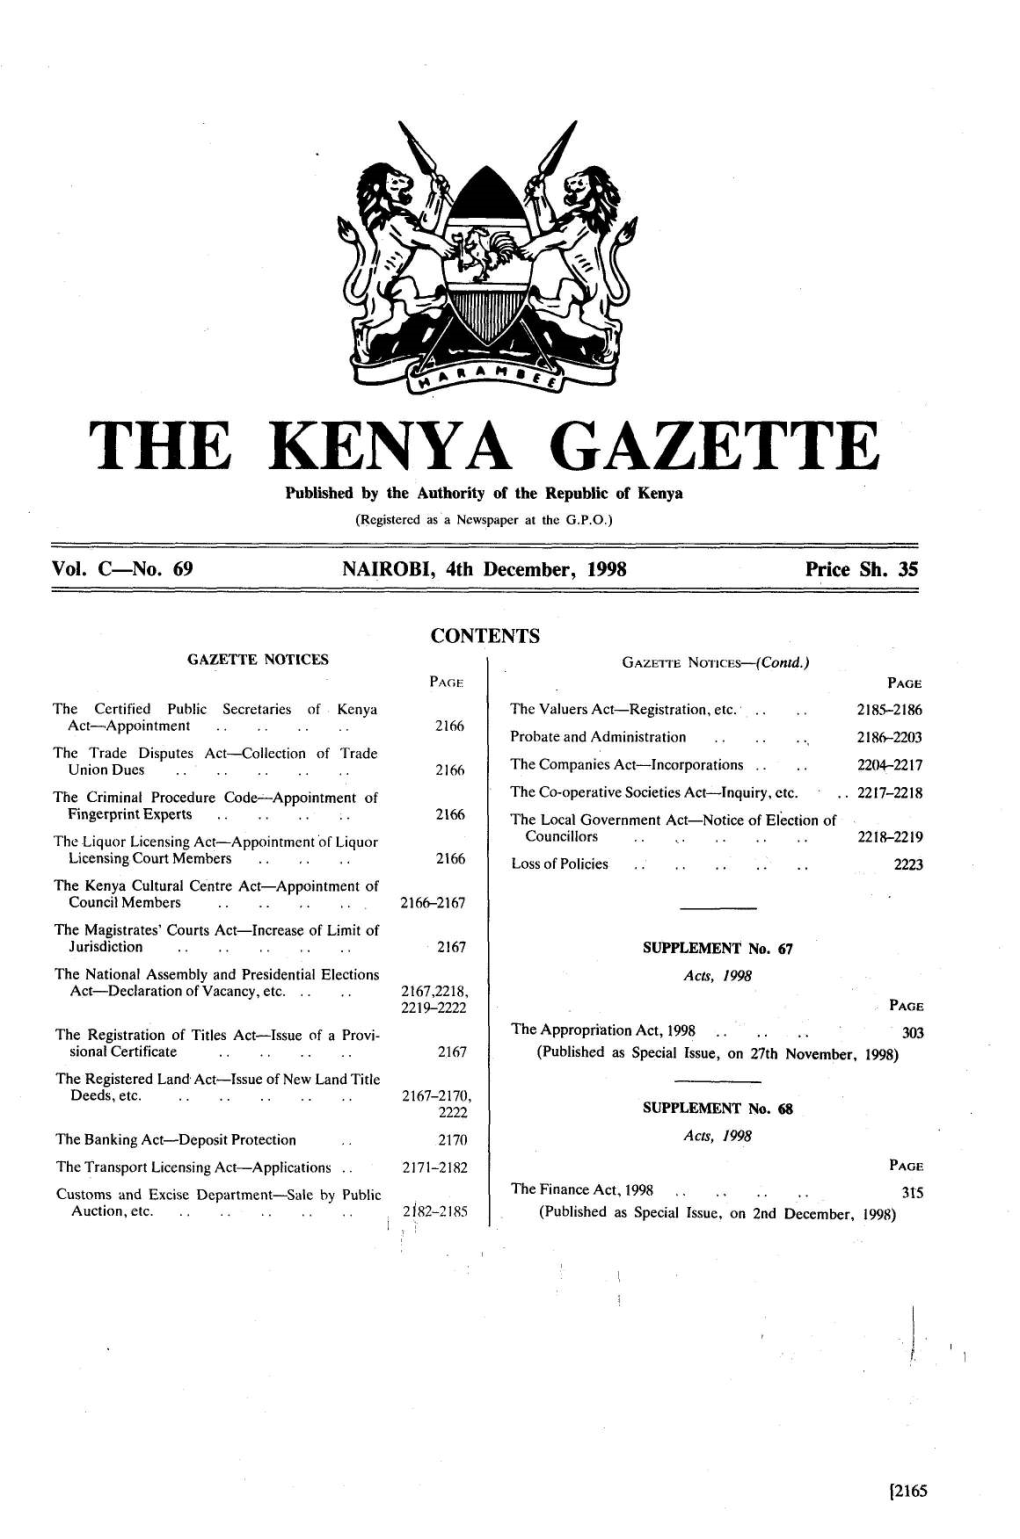 THE KENYA GAZETTE Published by the Authority of the Republic of Kenya (Registered As a Newspaper at the G.P.O.)